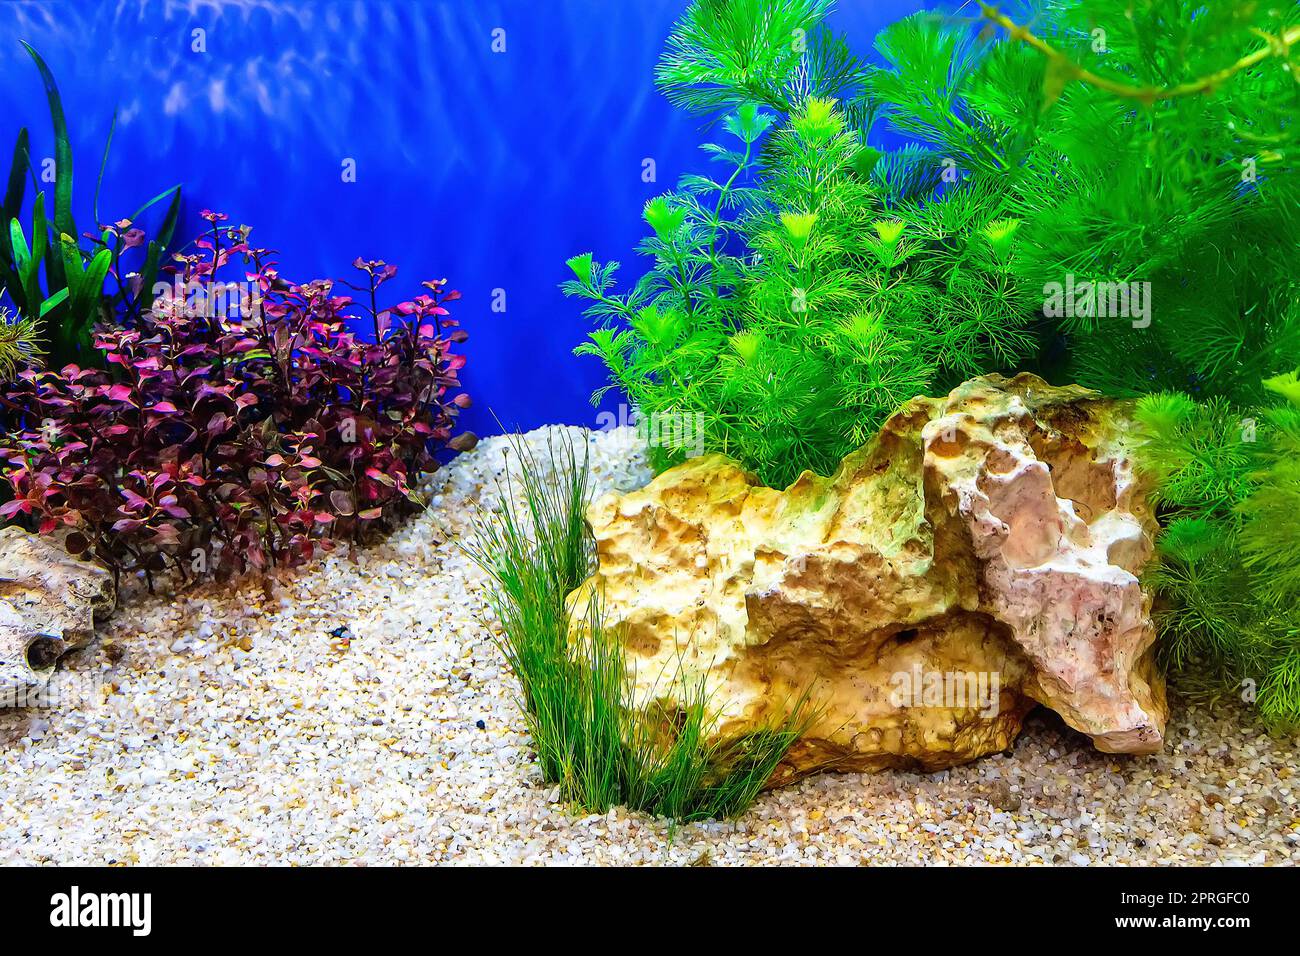 https://c8.alamy.com/comp/2PRGFC0/underwater-landscape-nature-forest-style-aquarium-tank-with-a-variety-of-aquatic-plants-stones-and-herb-decorations-2PRGFC0.jpg